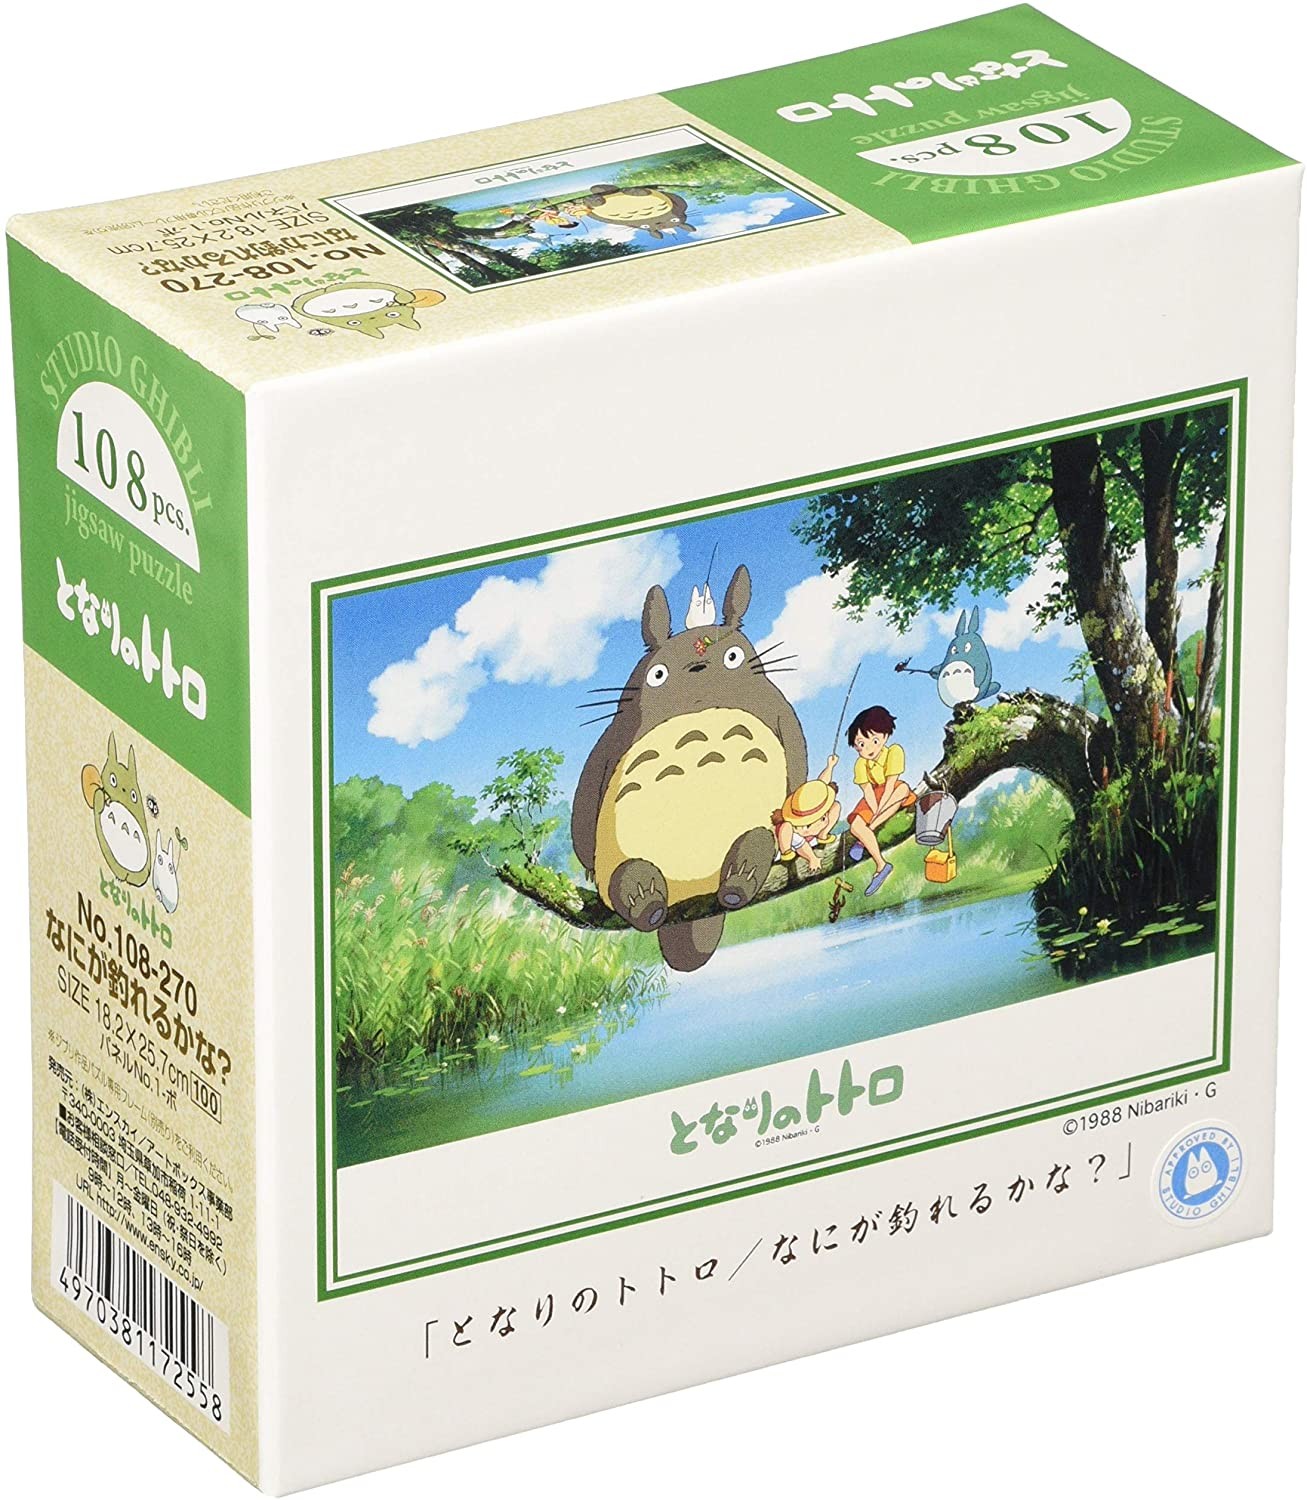 Buy Studio Ghibli puzzles and games – Store selling Ghibli and